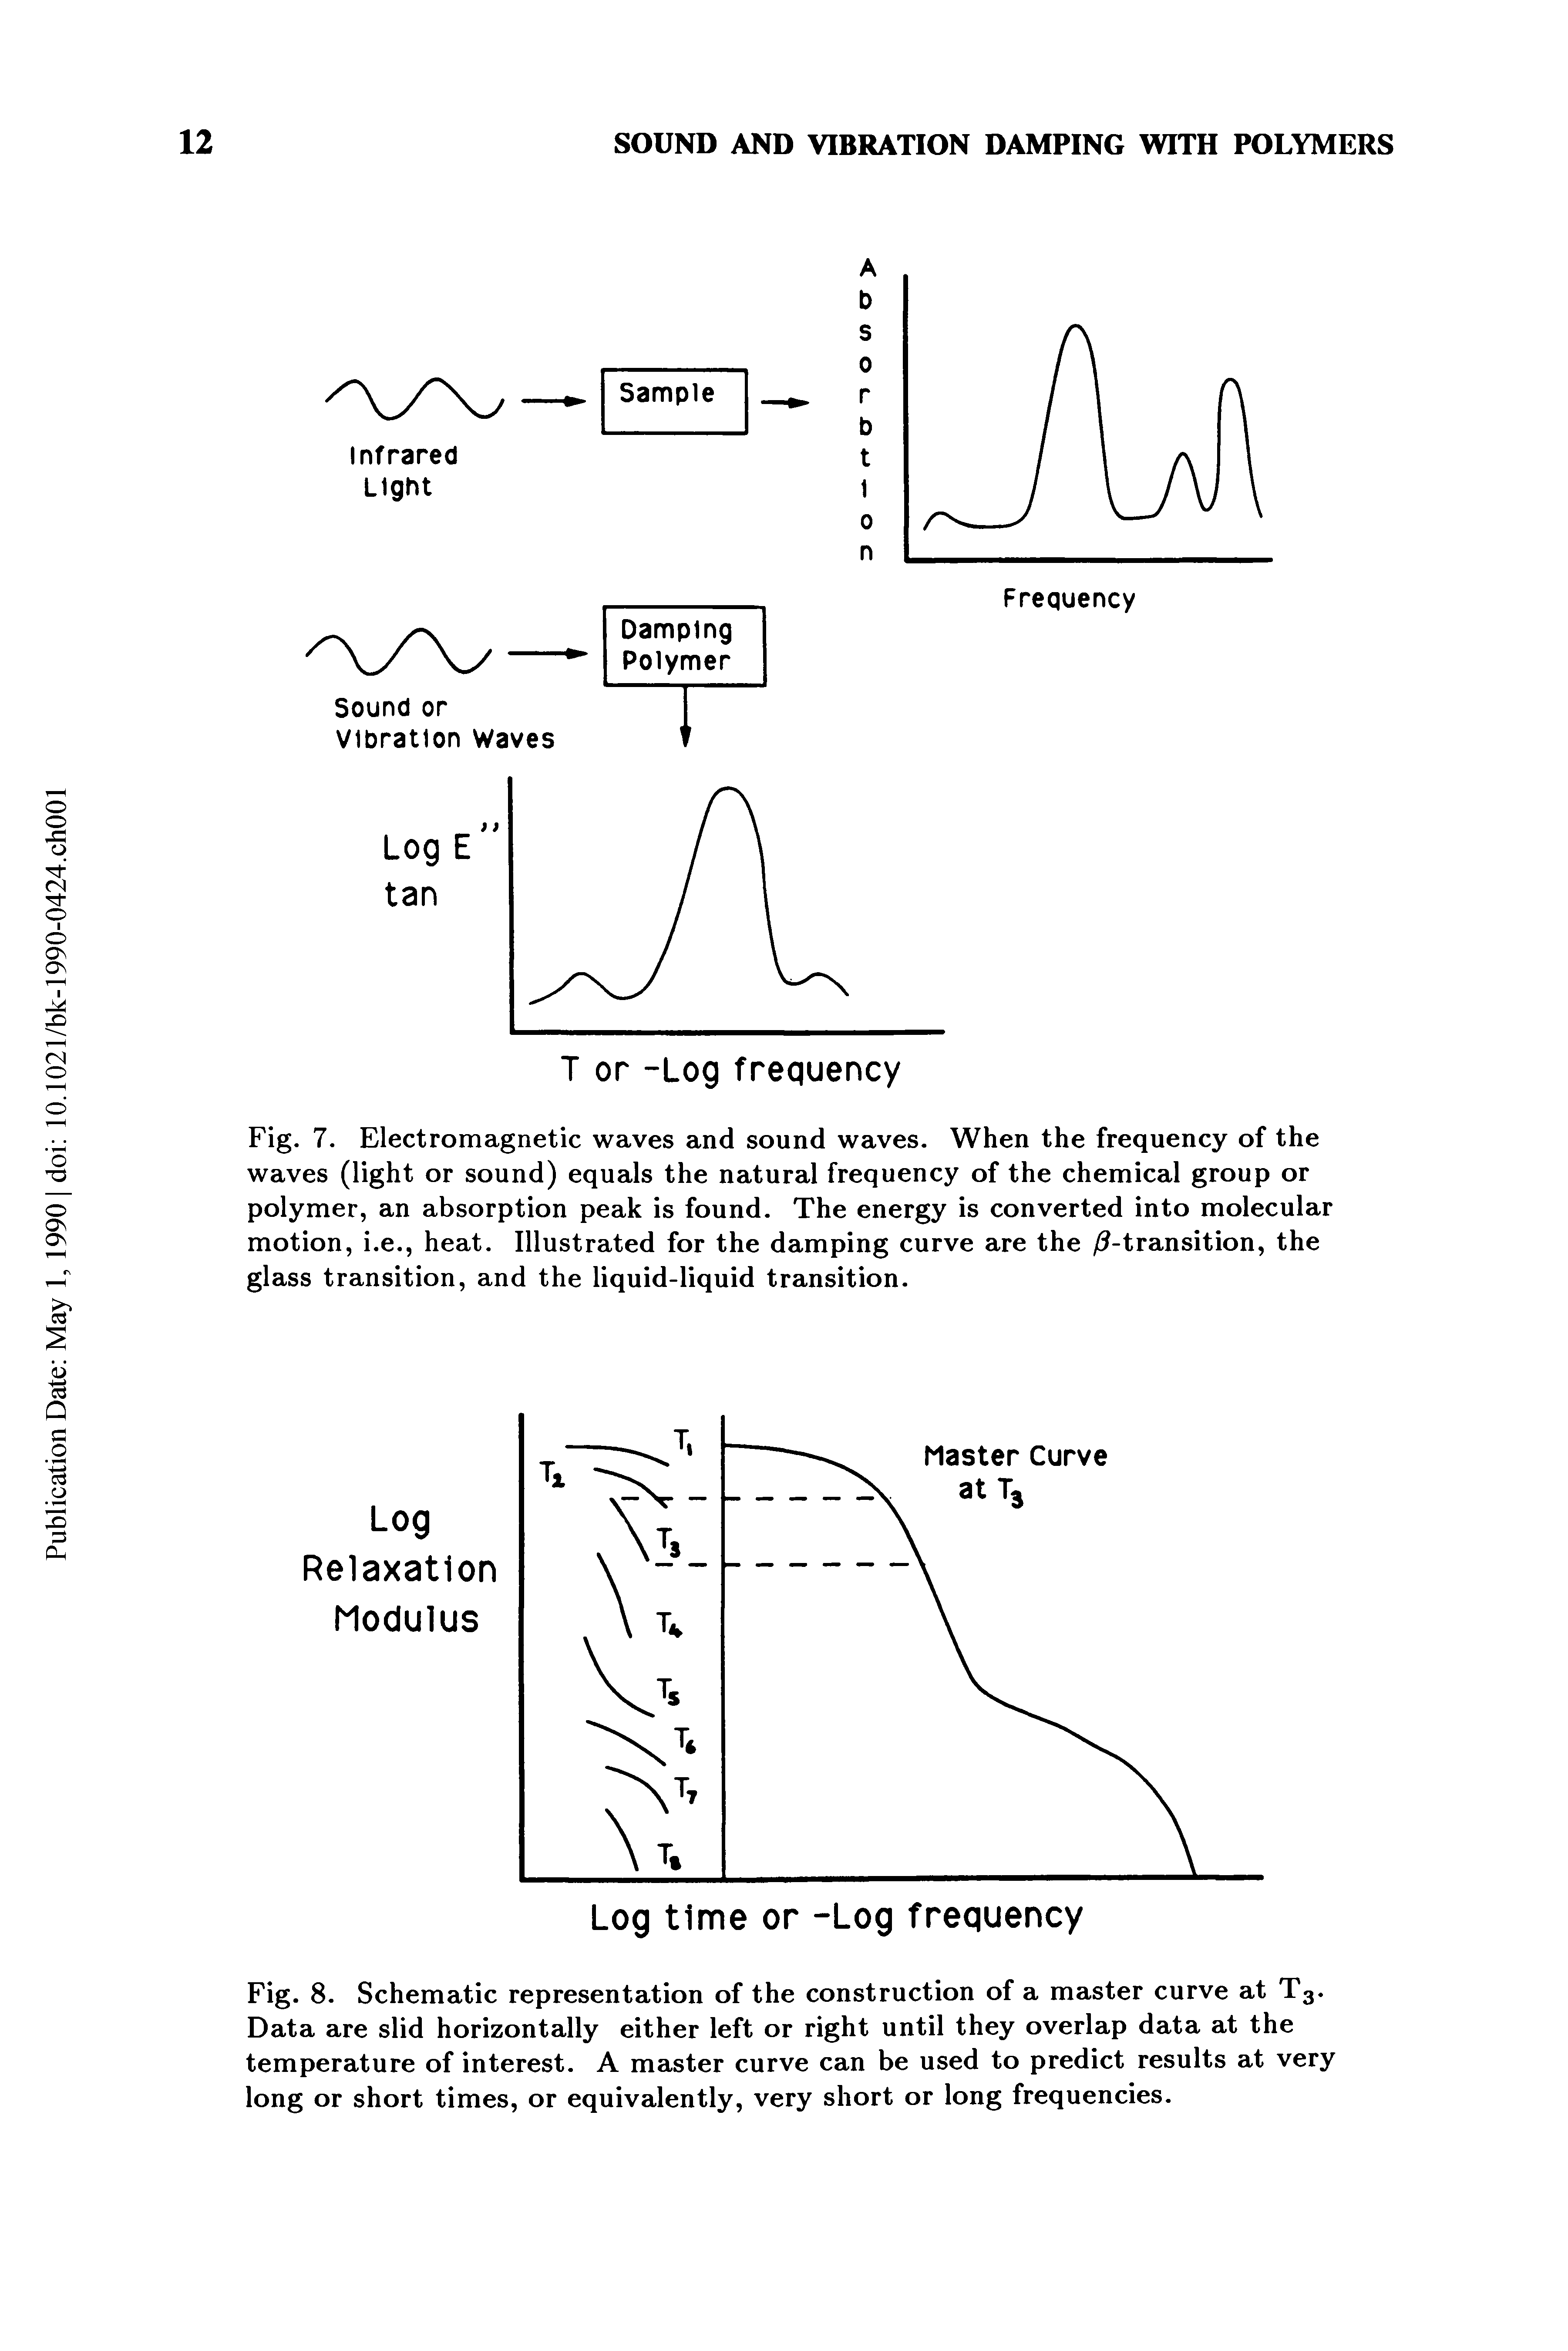 Fig. 8. Schematic representation of the construction of a master curve at T3. Data are slid horizontally either left or right until they overlap data at the temperature of interest. A master curve can be used to predict results at very long or short times, or equivalently, very short or long frequencies.